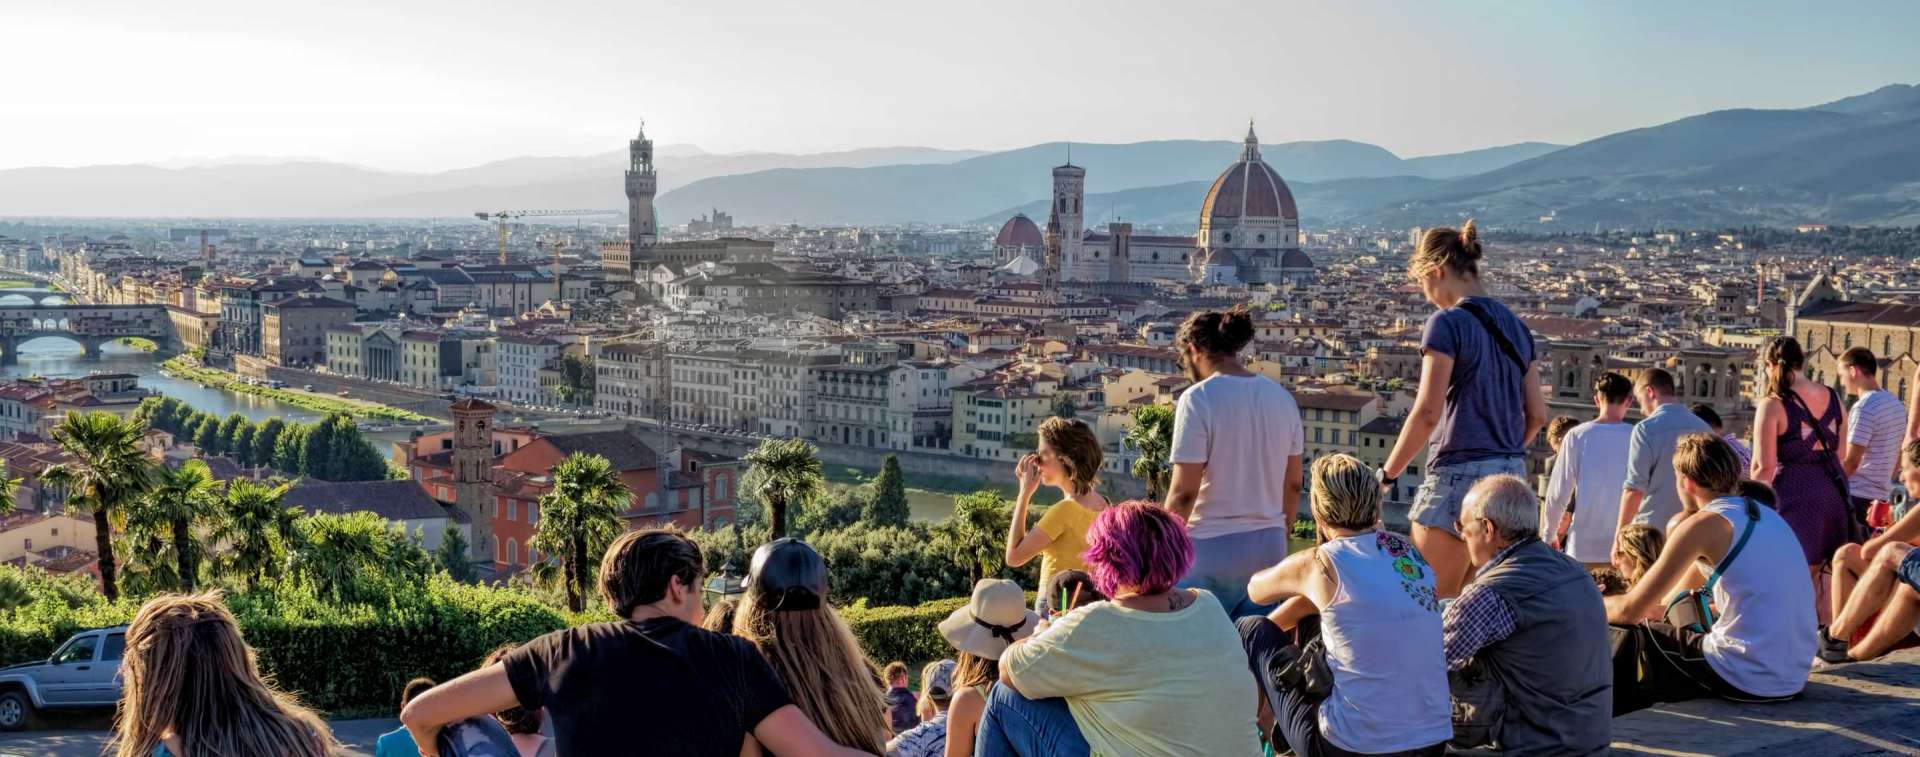 When is the Best Time to Visit Florence?